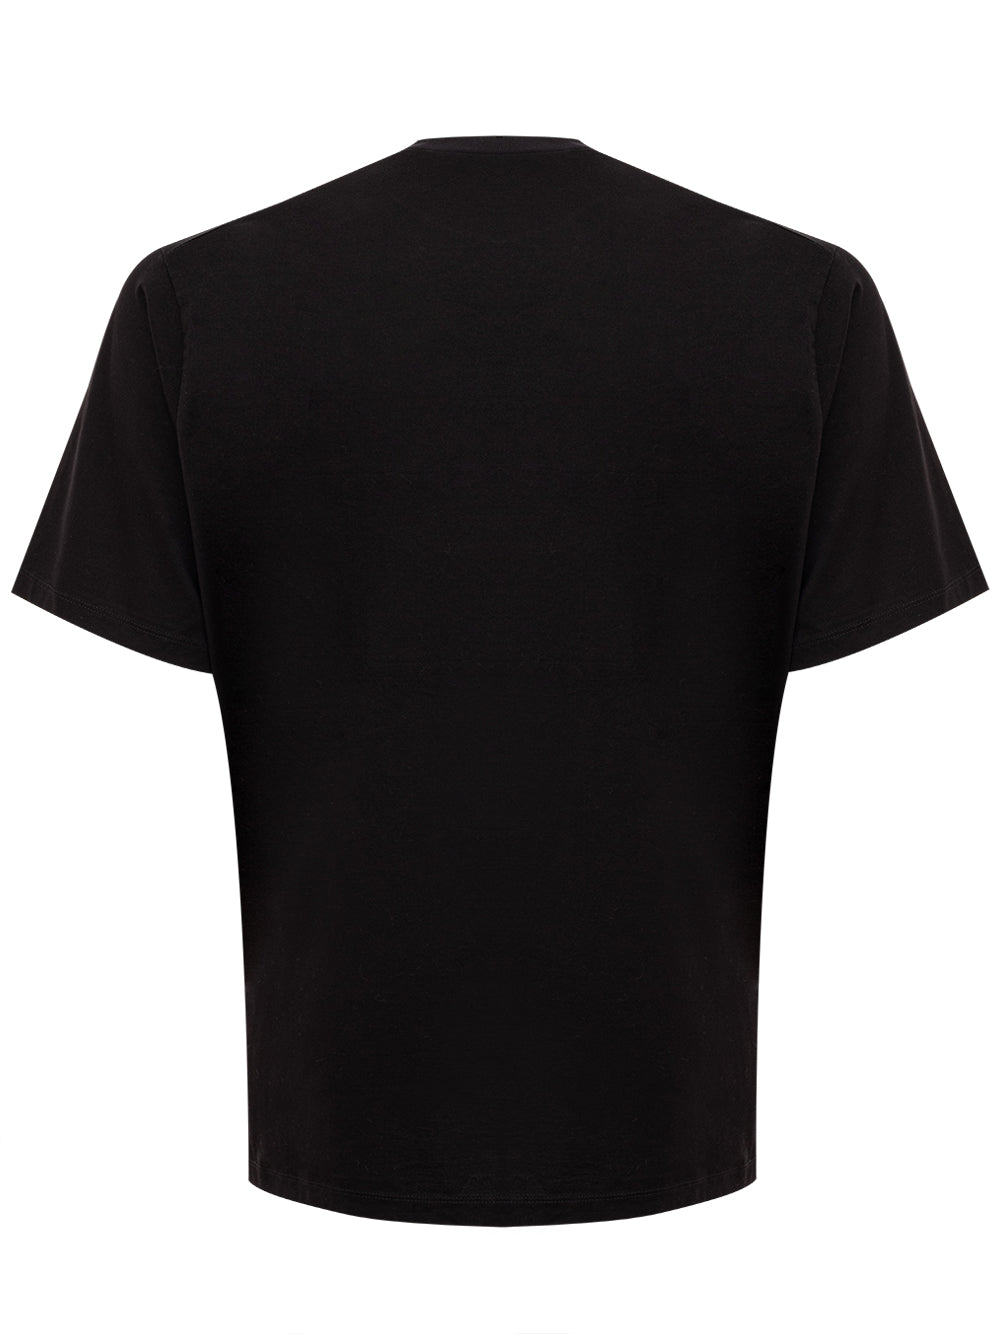 T-Shirt Over nera con stampa logo Dsquared2